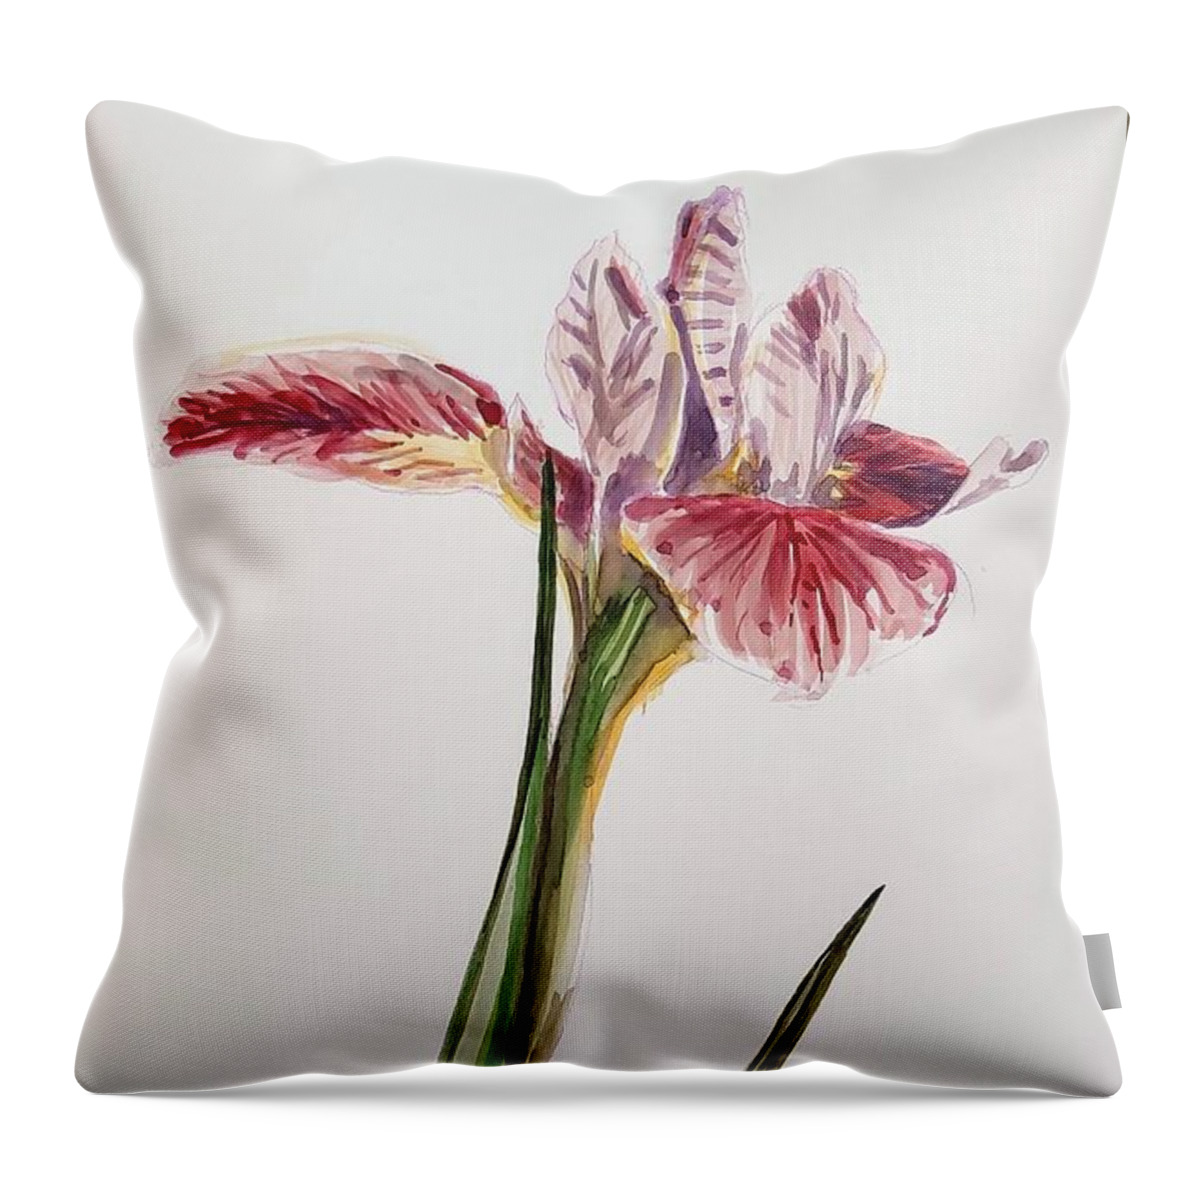 Flower Throw Pillow featuring the painting Pink Orchid by George Cret